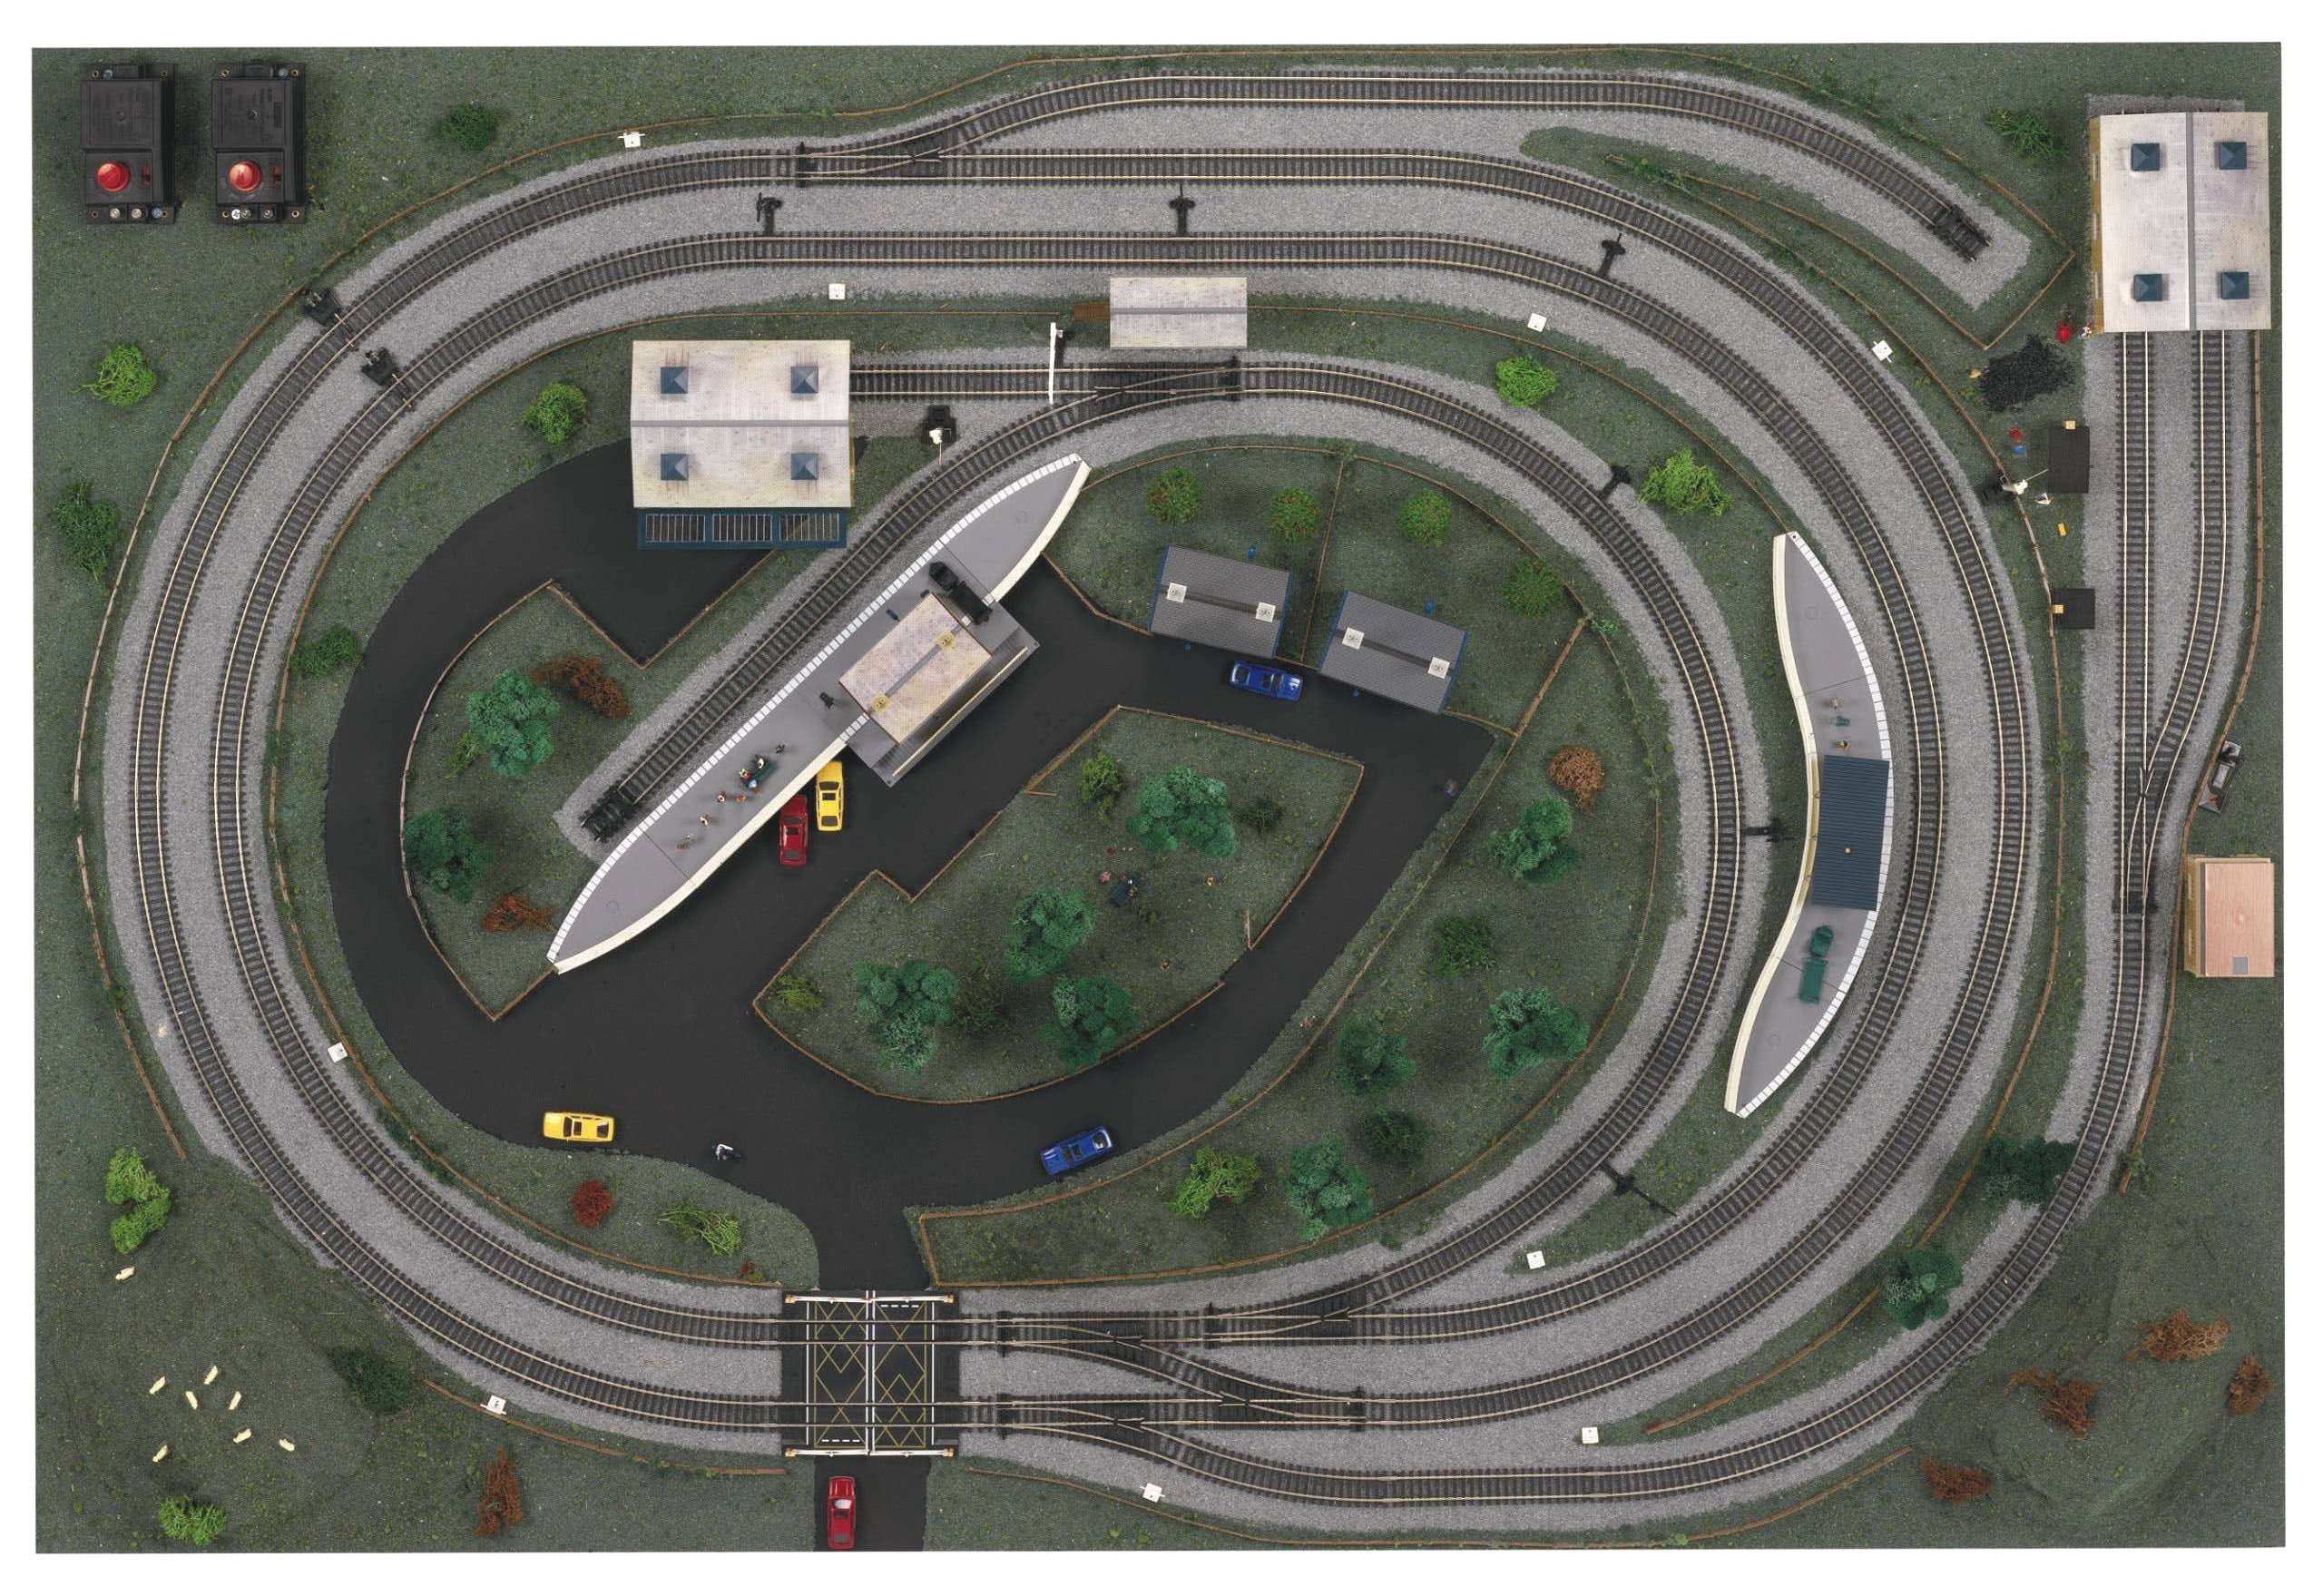  in it's development. This mat is supplied with every Hornby train set